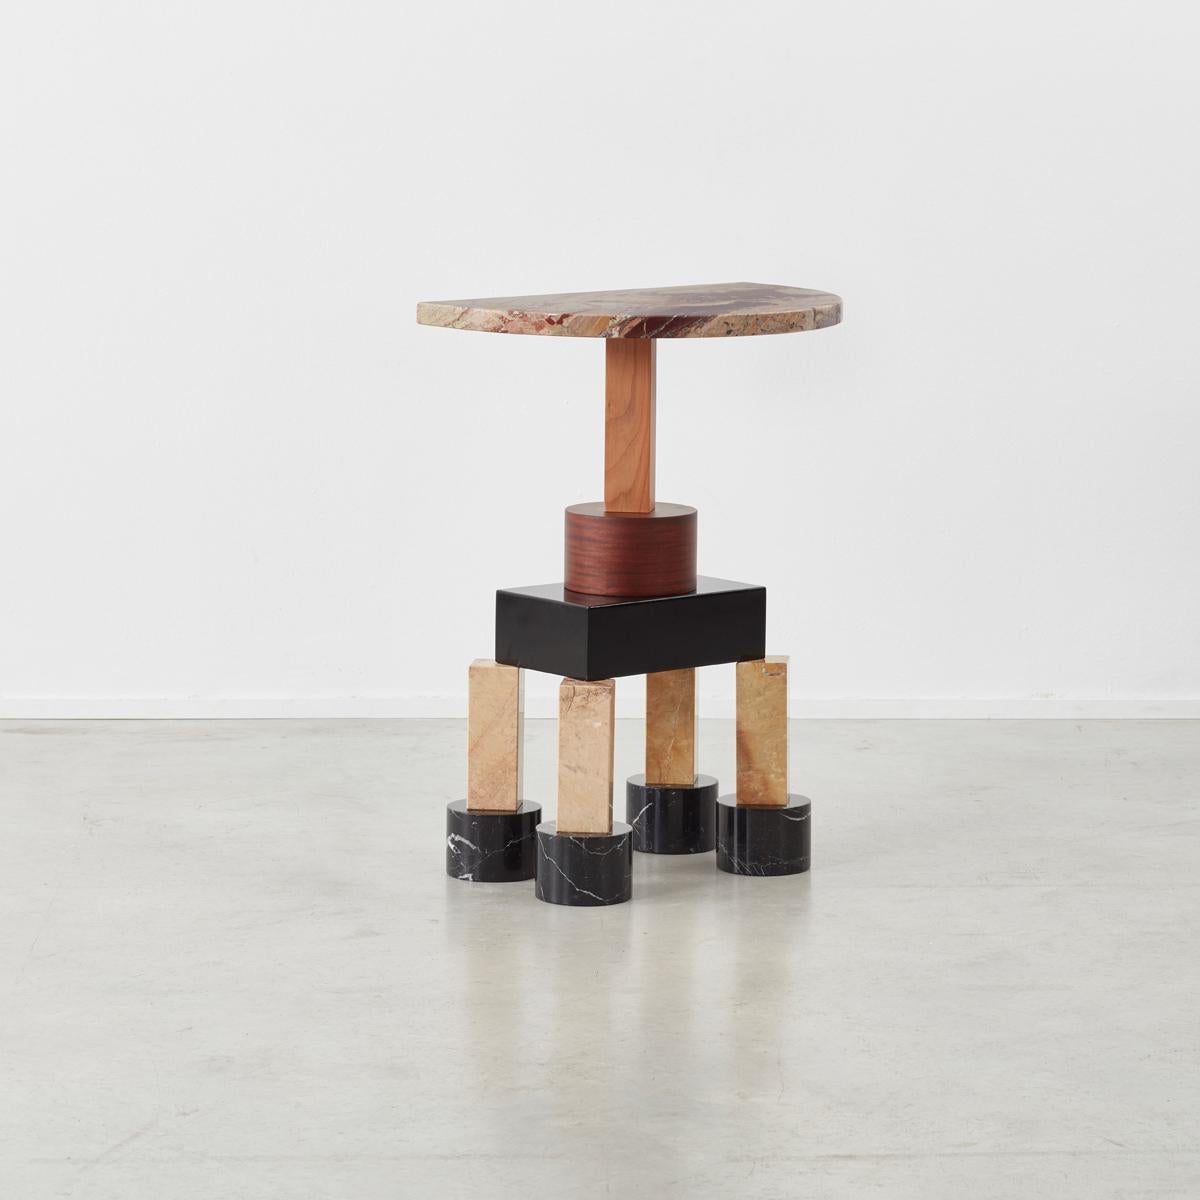 Post-Modern Demistella Console by Ettore Sottsass for Up&Up, Italy, circa 1990